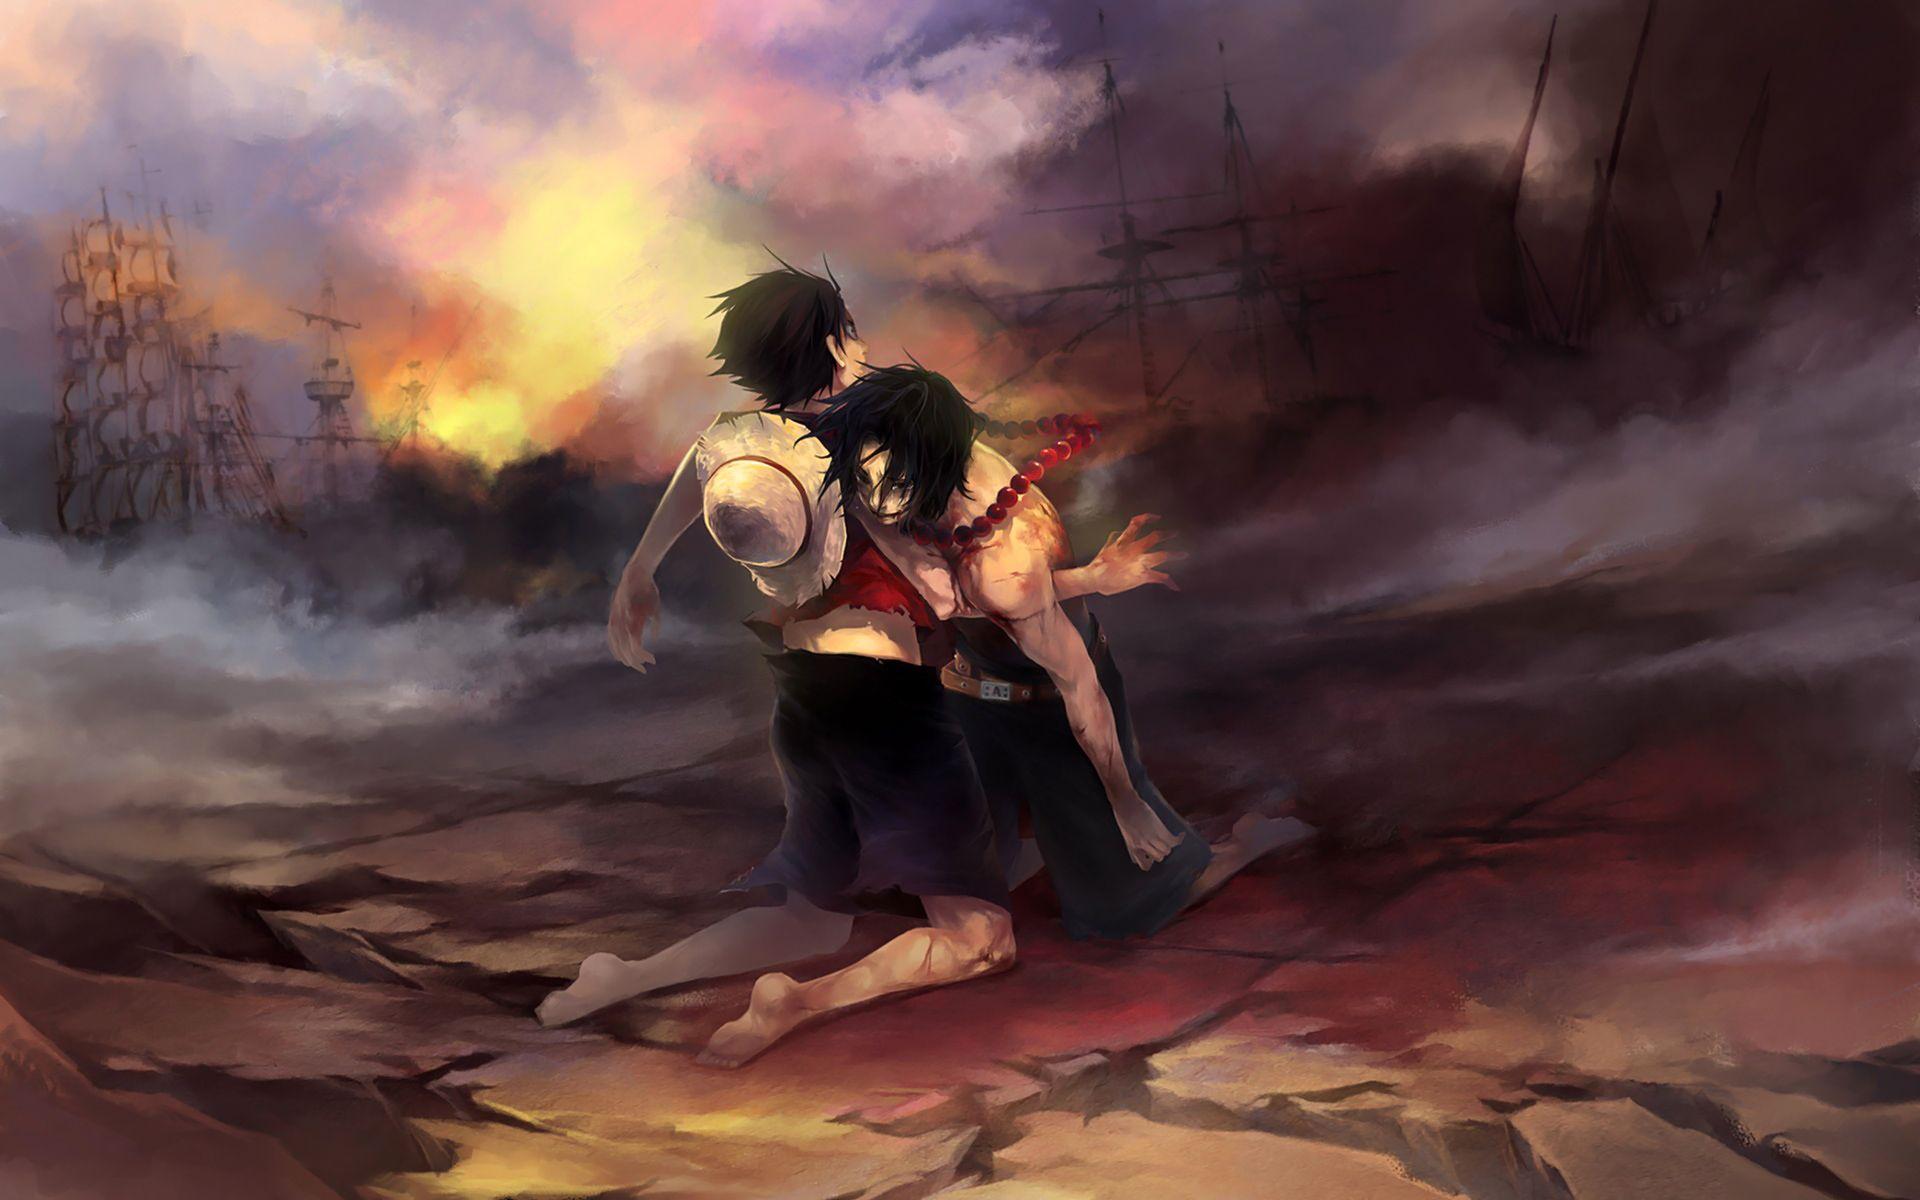 1920 x 1200 · jpeg - Anime One Piece Portgas D. Ace Monkey D. Luffy Wallpaper | All about ...